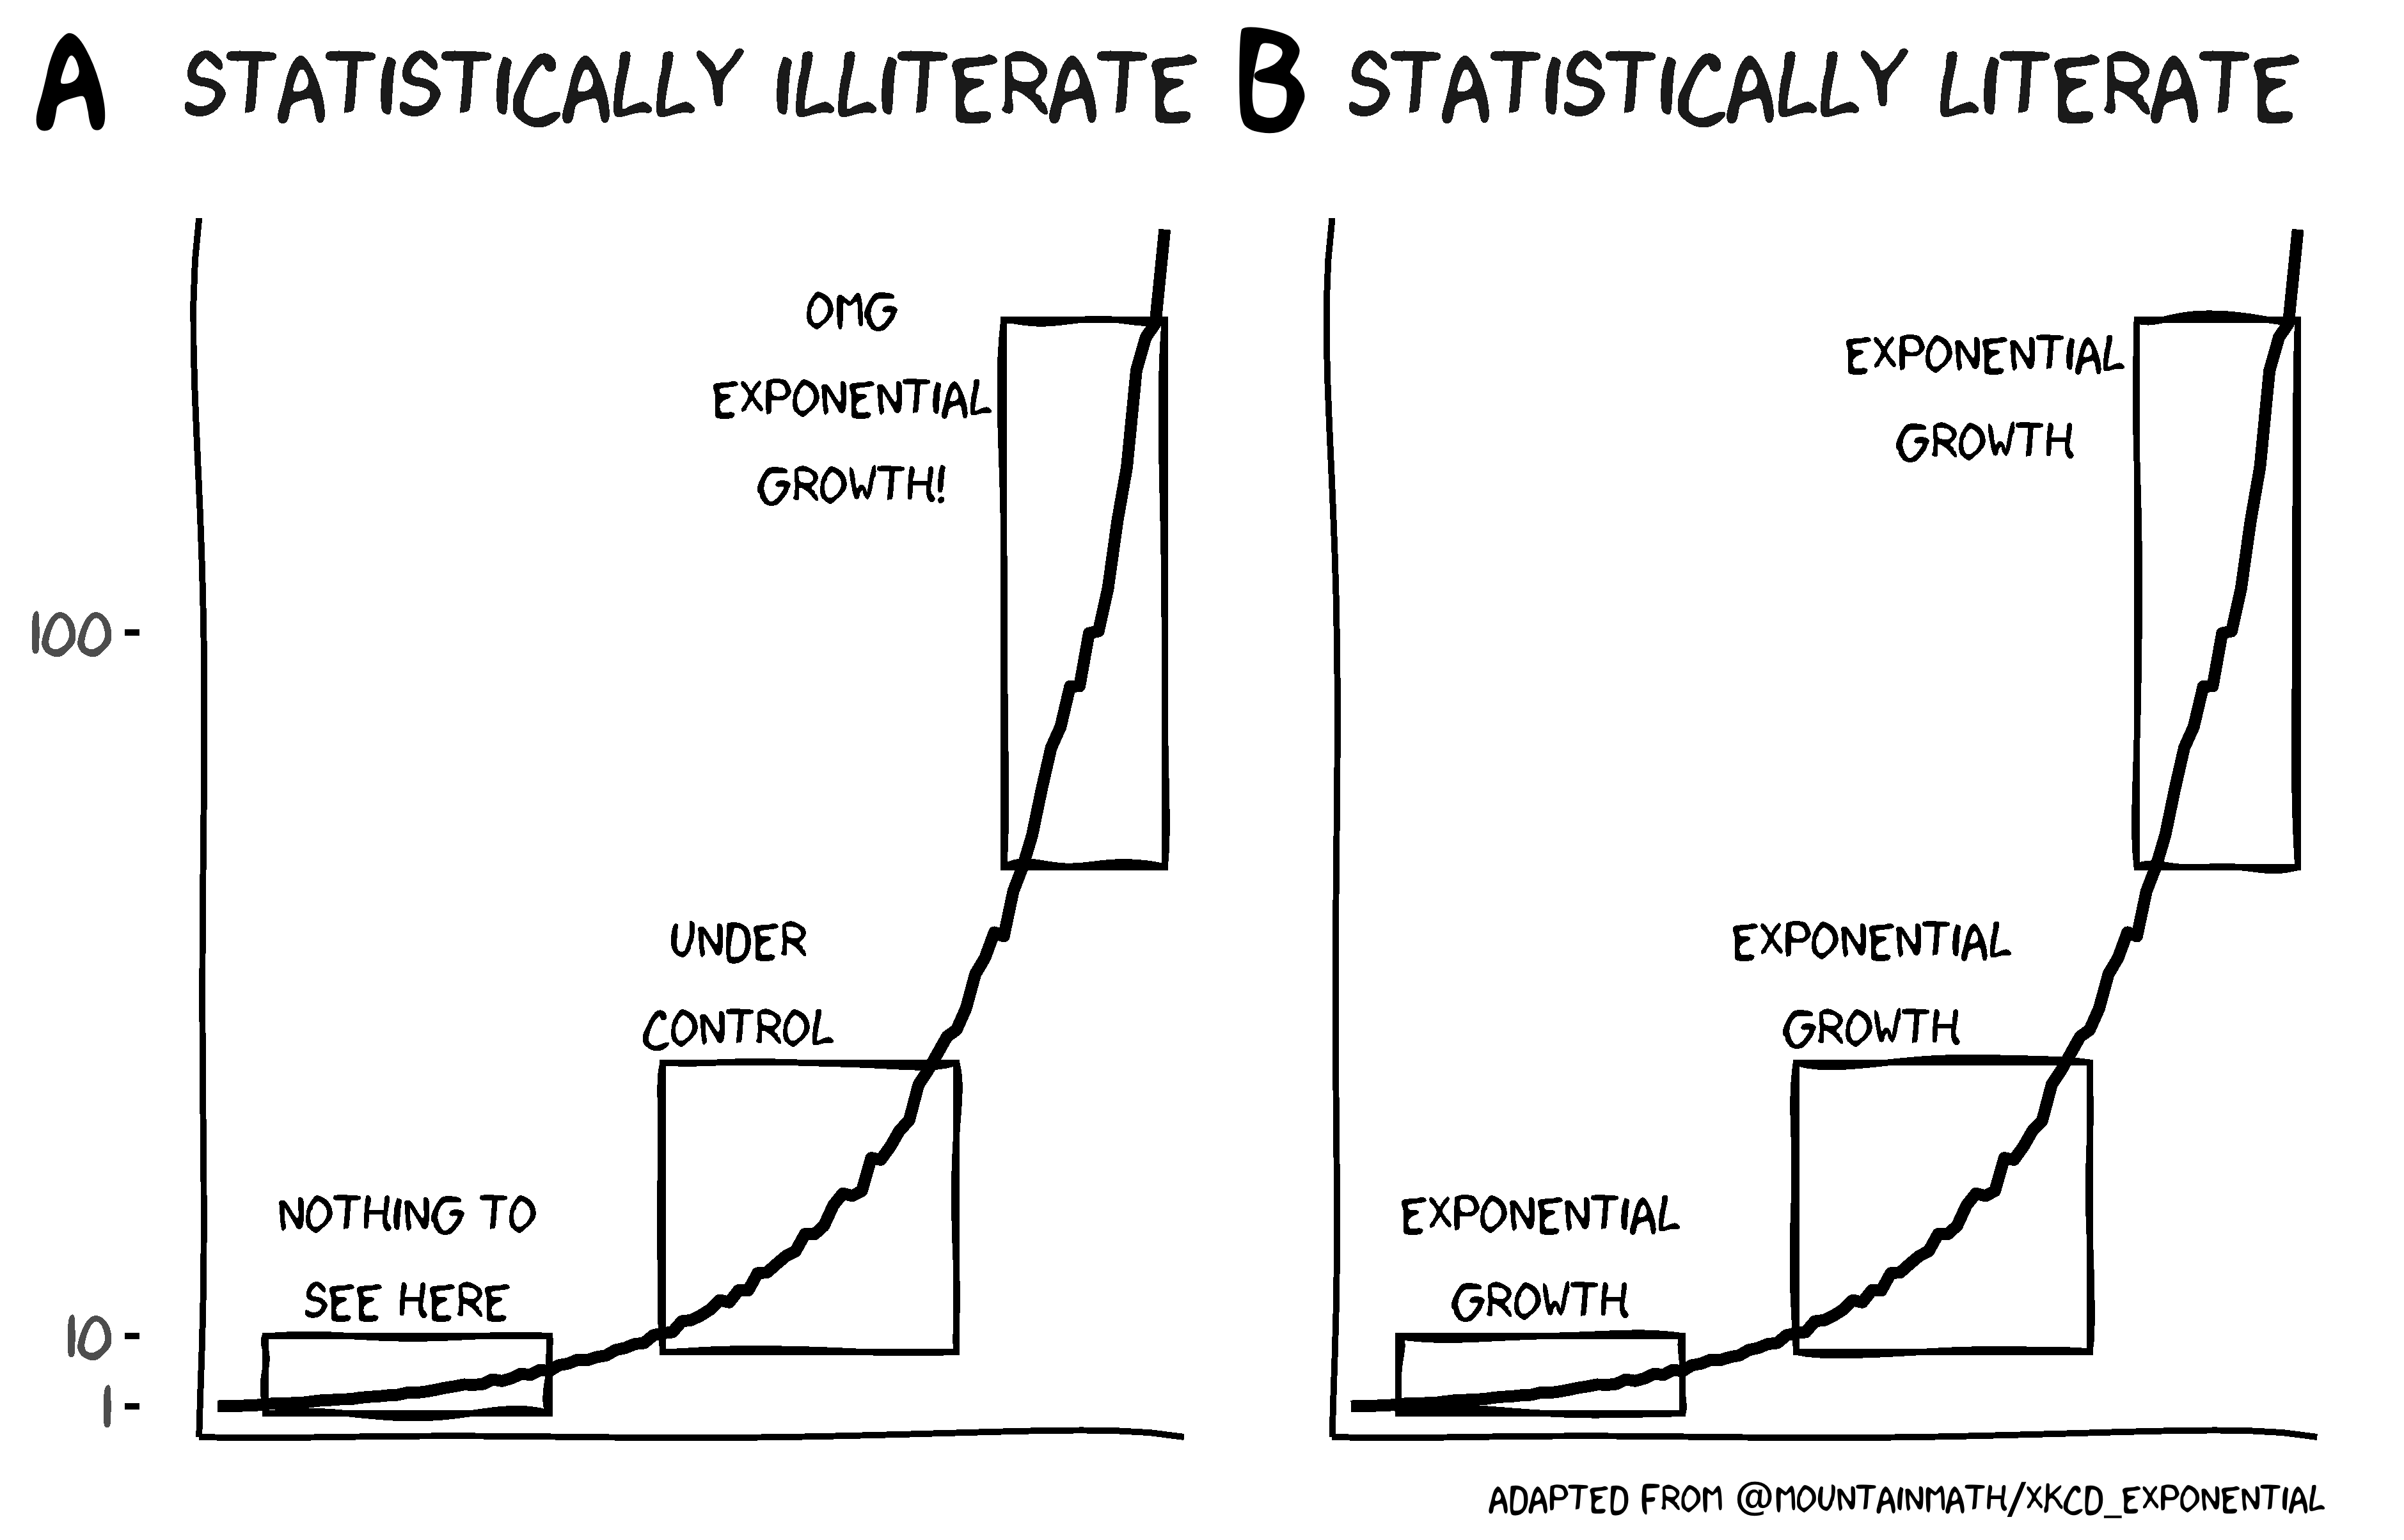 Being able to interpret exponential growth is matter of statistical literacy